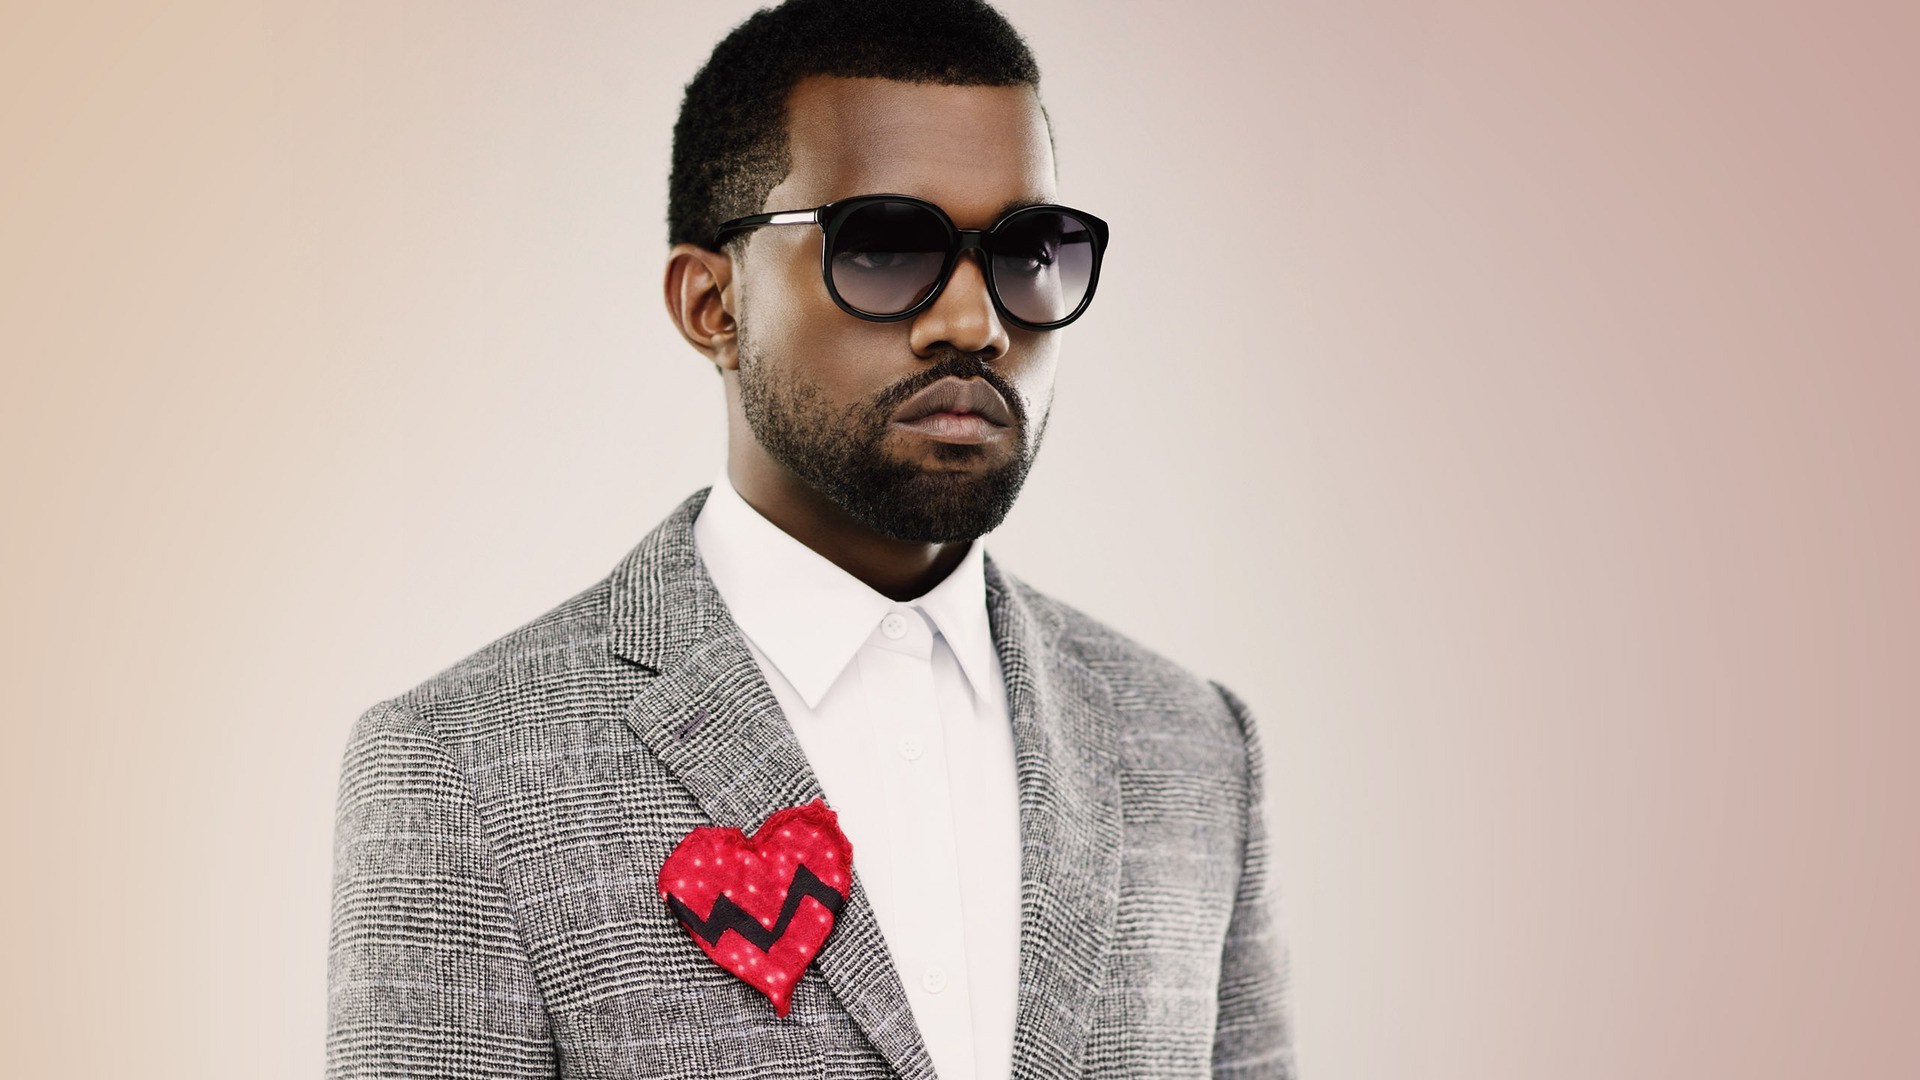 Kanye West Wallpaper   Wallpaper High Definition High Quality